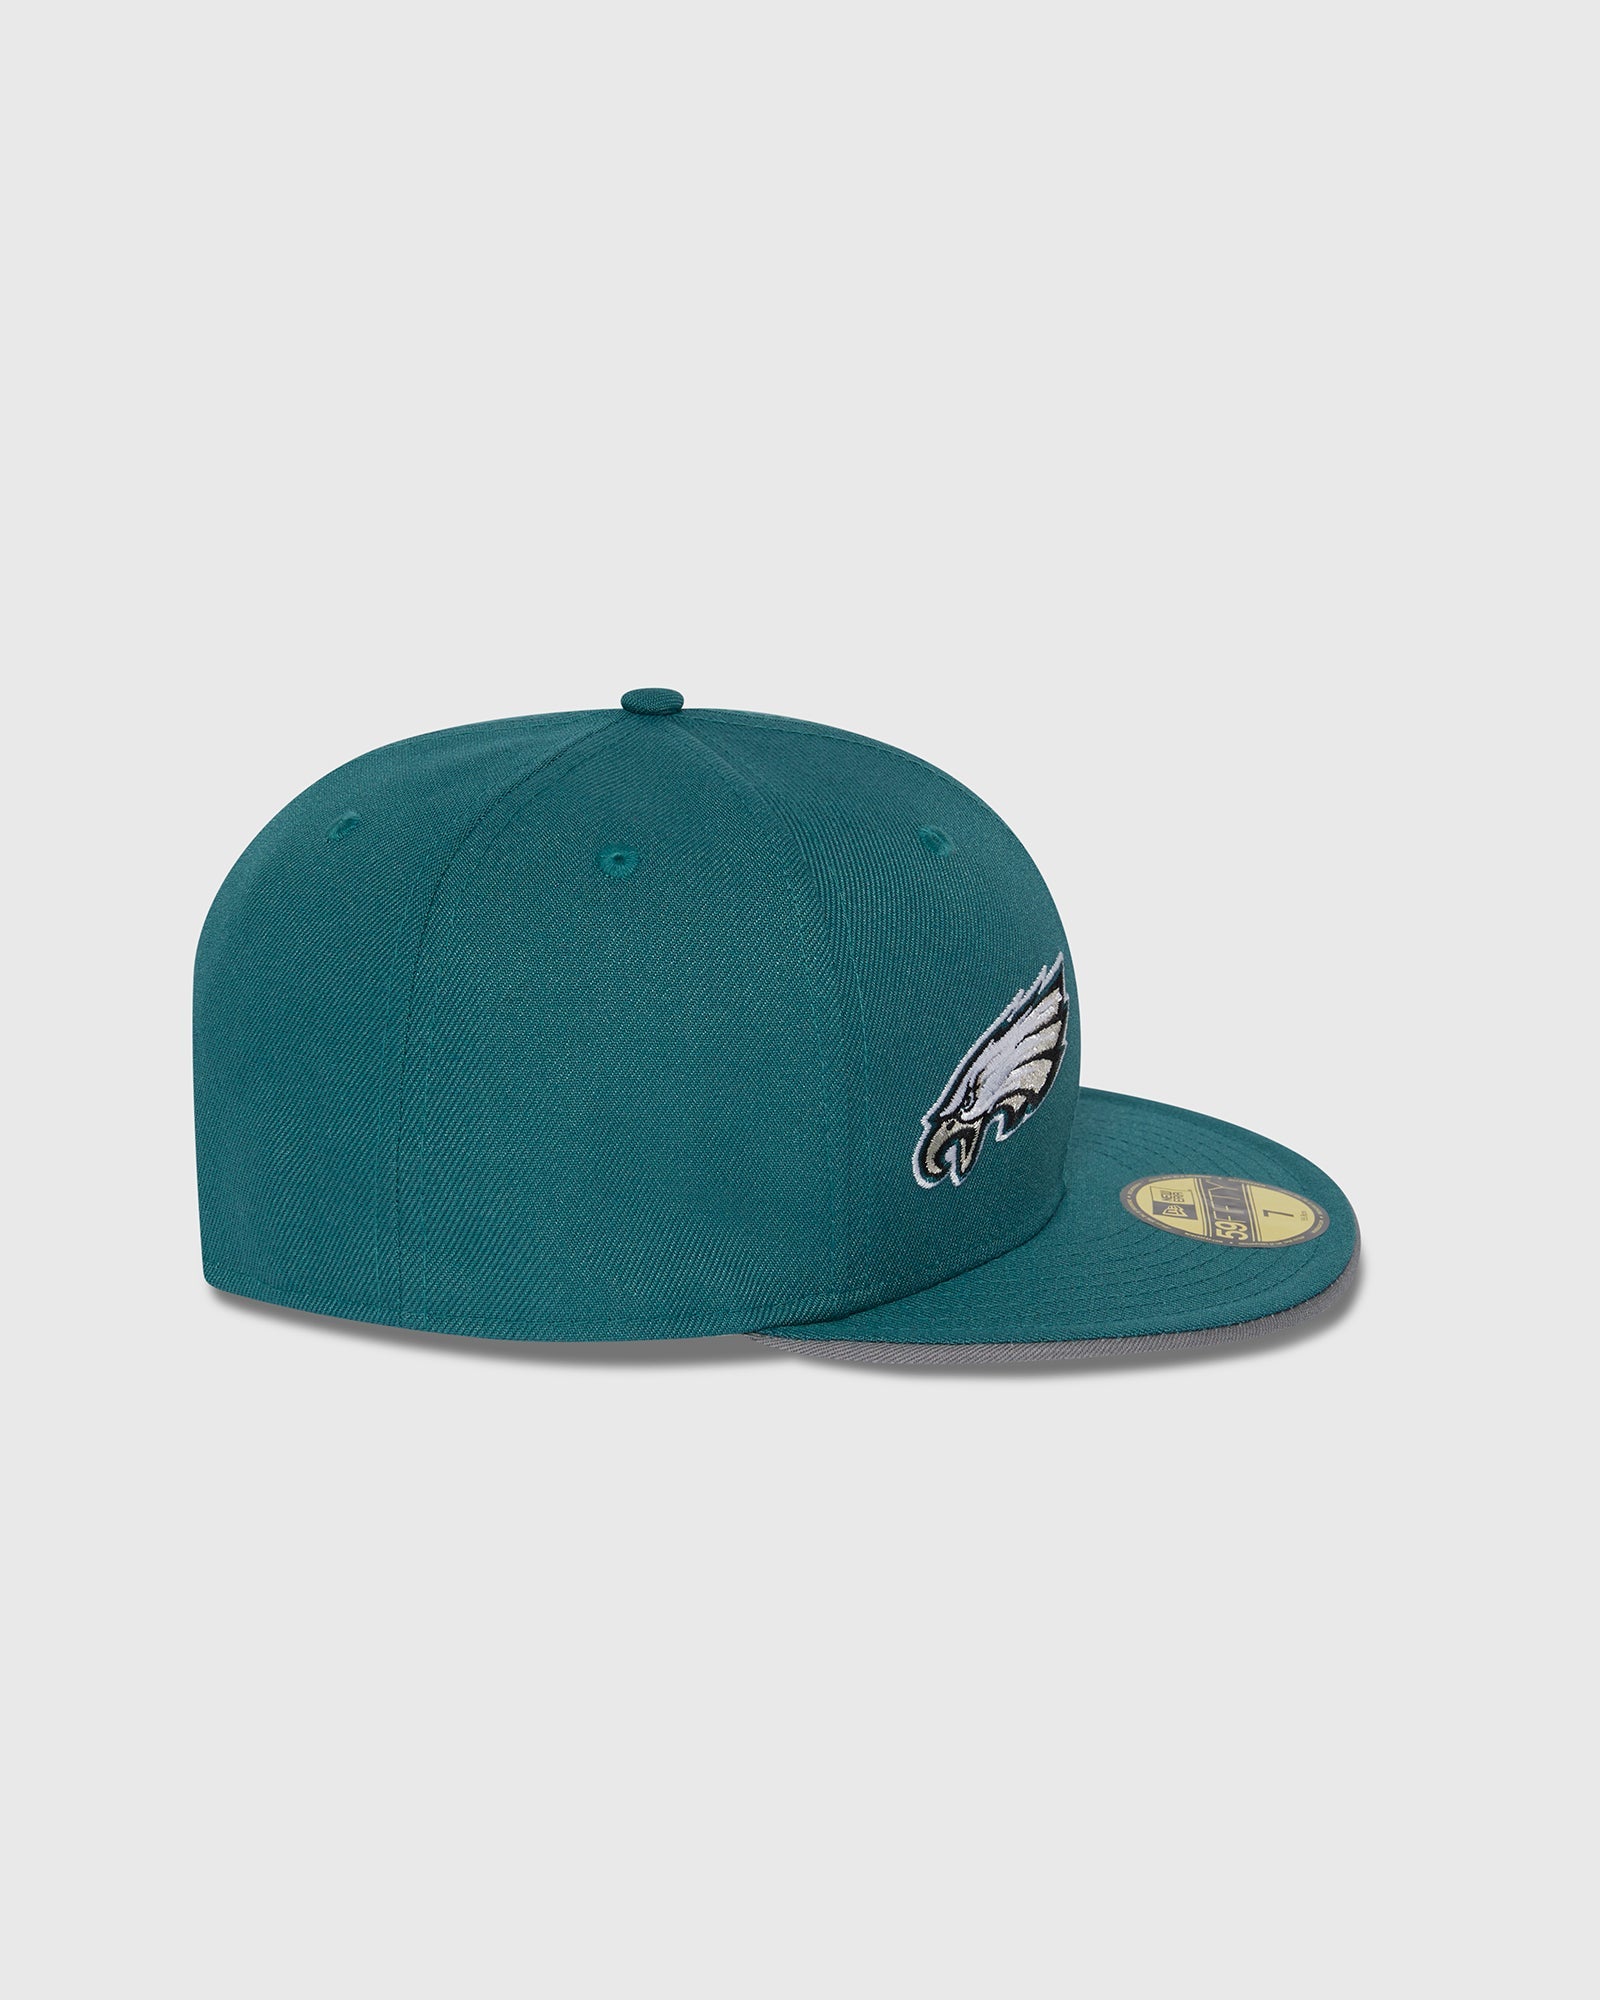 NFL Philadelphia Eagles New Era 59Fifty Fitted Cap - Green IMAGE #7